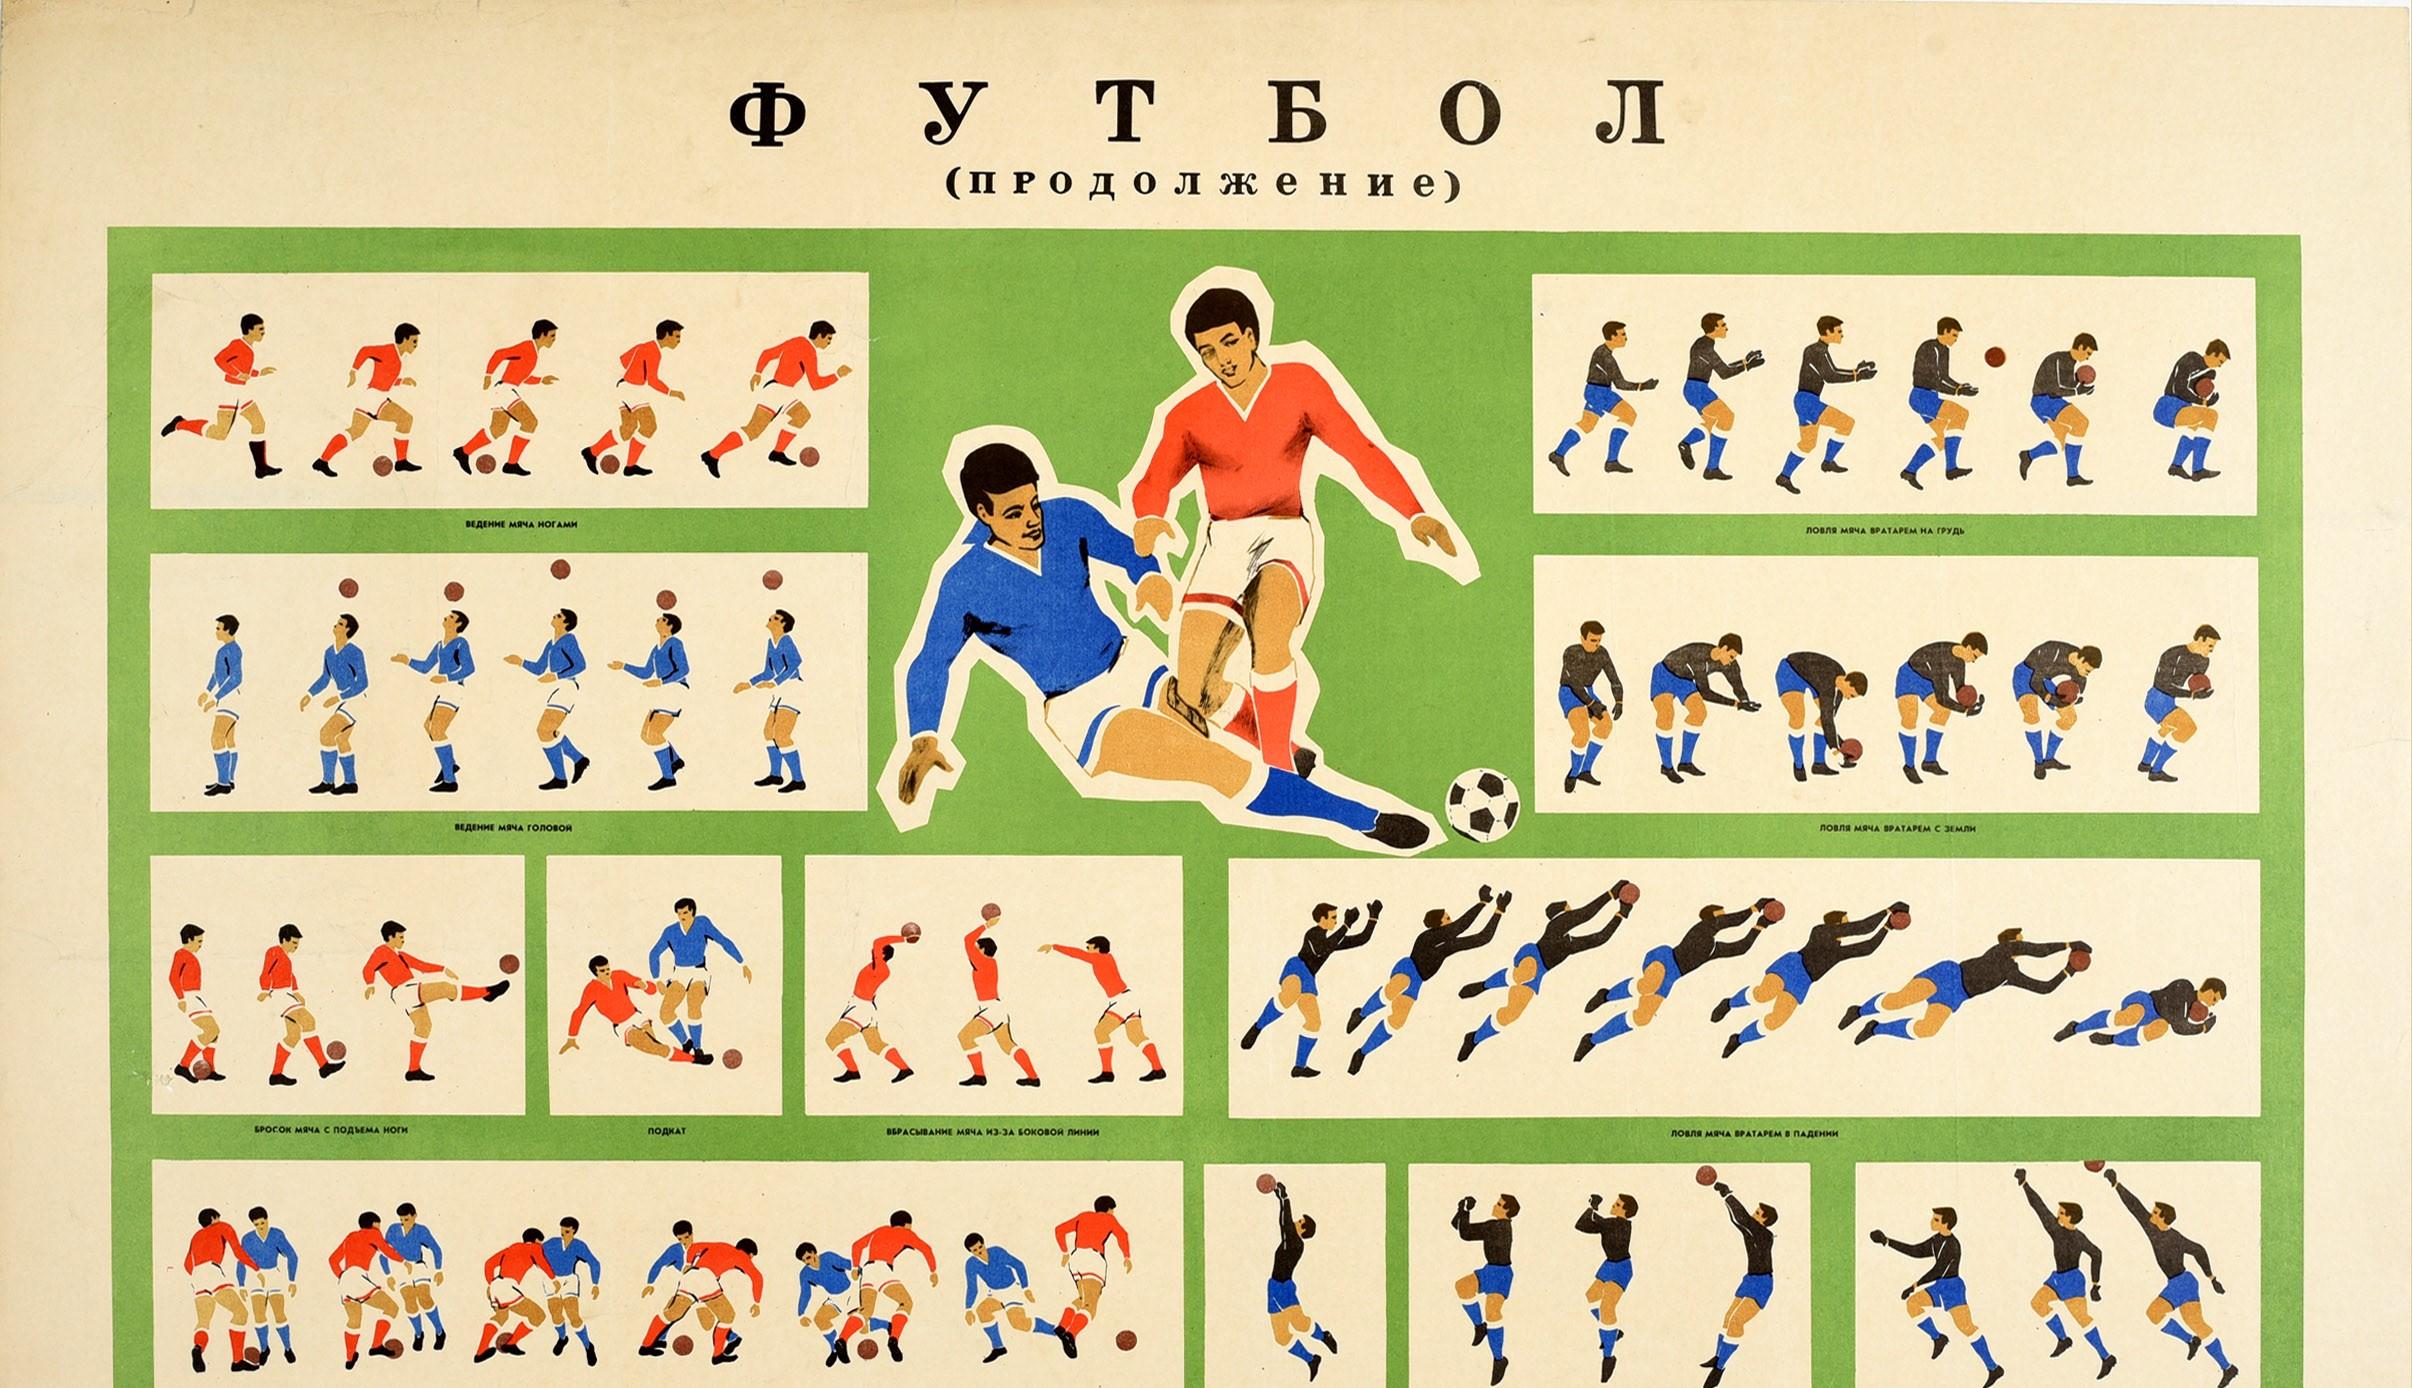 Original vintage Soviet instructional sport poster showing the positions, moves and game play of Football / ?????? (???????????) in images depicting a player in each box performing various actions such as how to run with the ball and catch it,